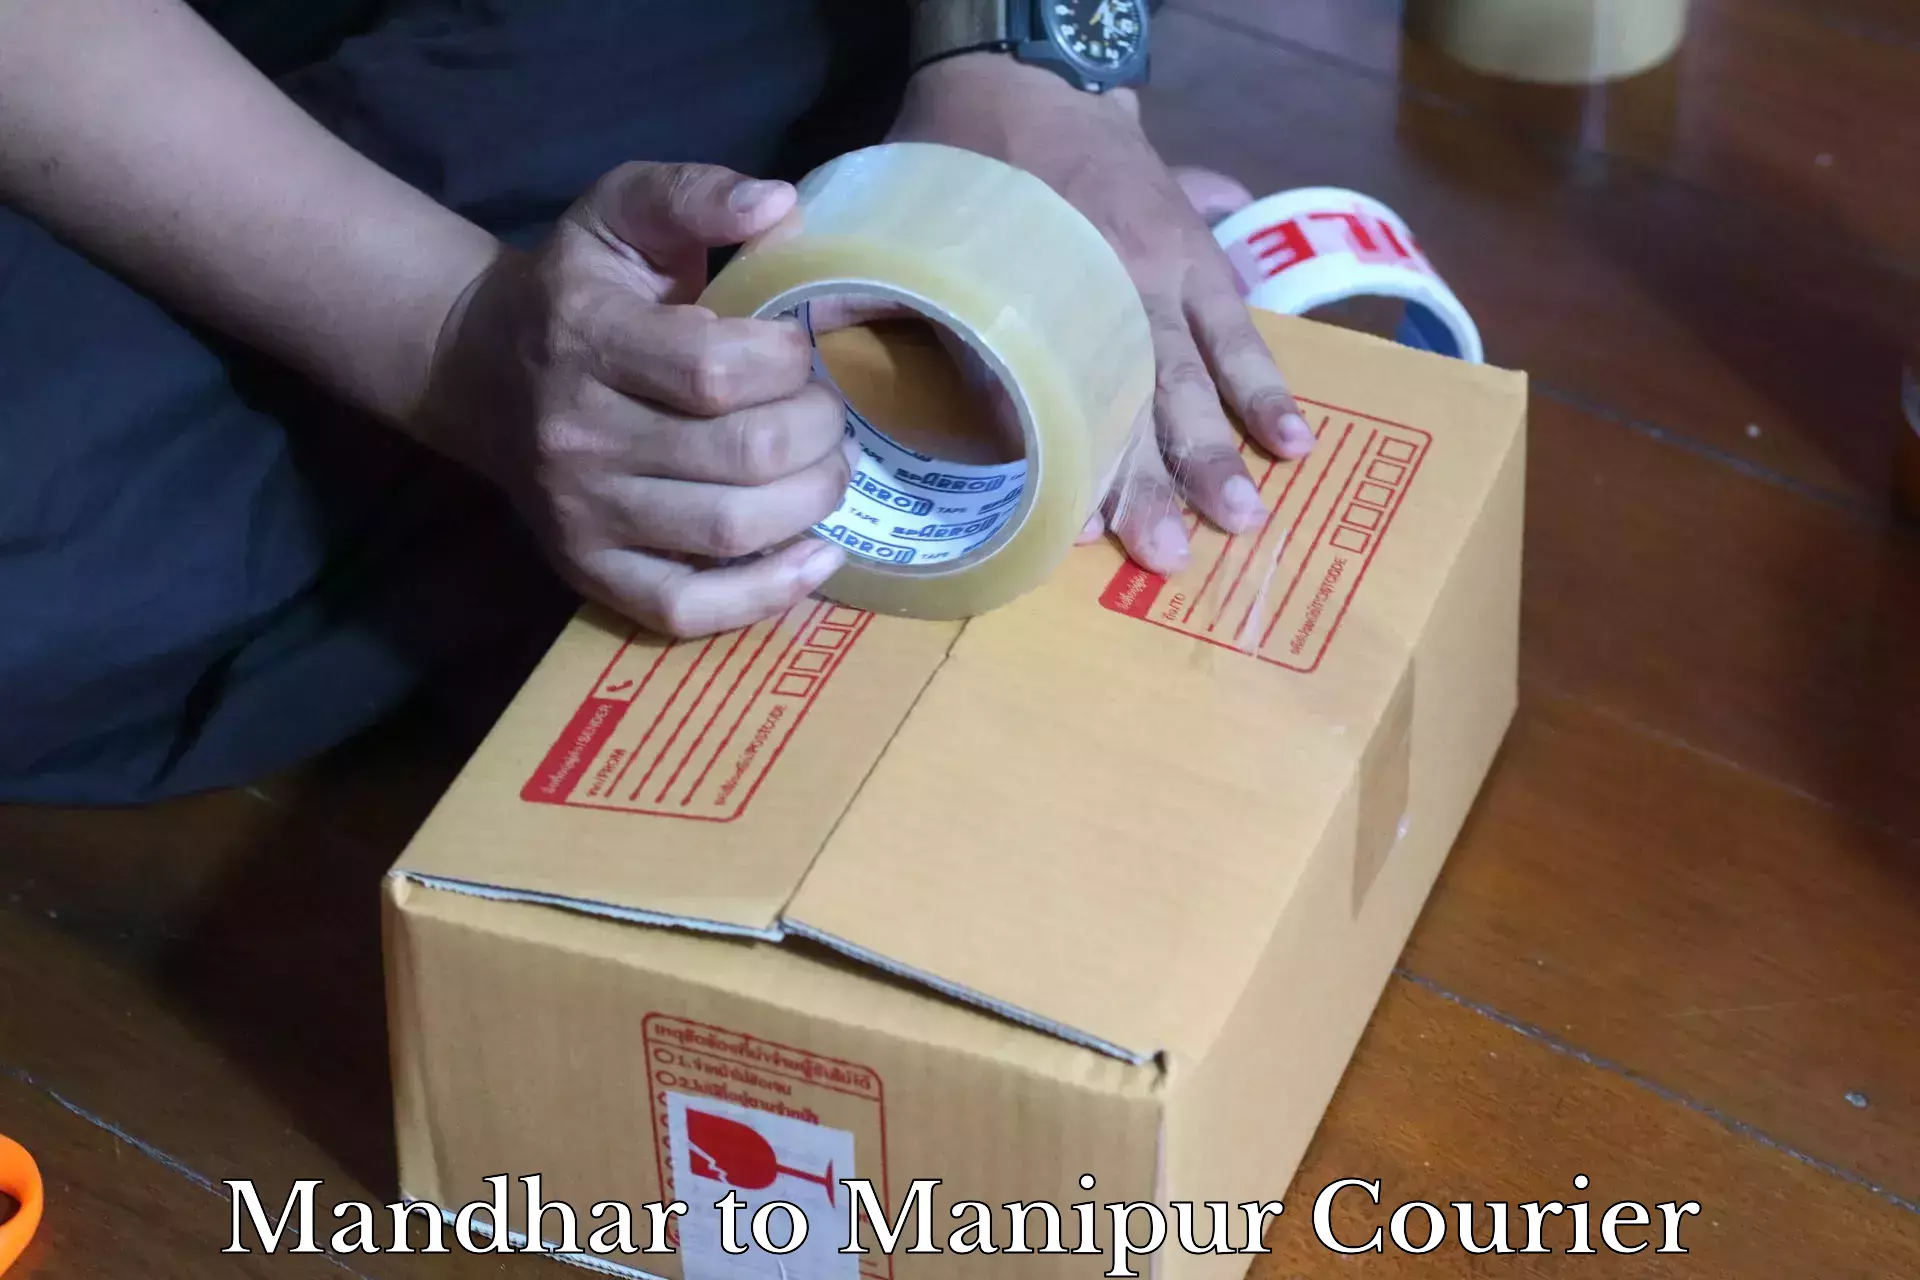 24-hour courier service Mandhar to Chandel